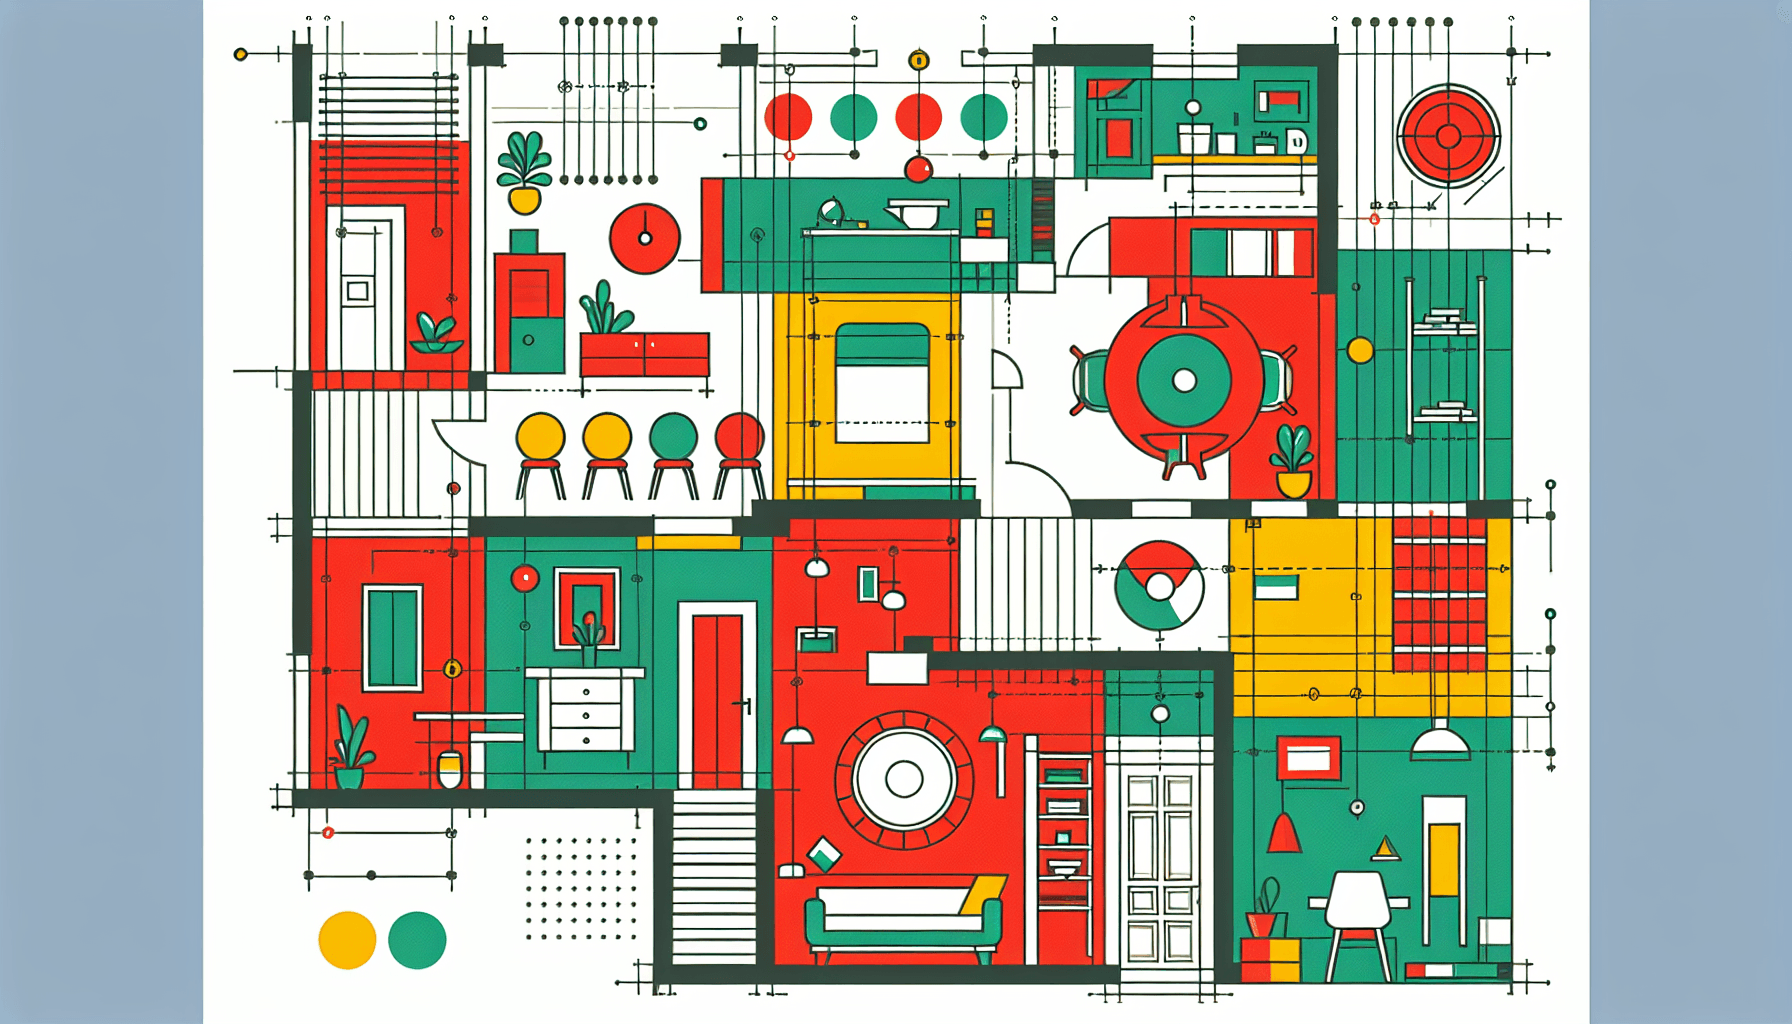 Blueprint in flat illustration style and white background, red #f47574, green #88c7a8, yellow #fcc44b, and blue #645bc8 colors.